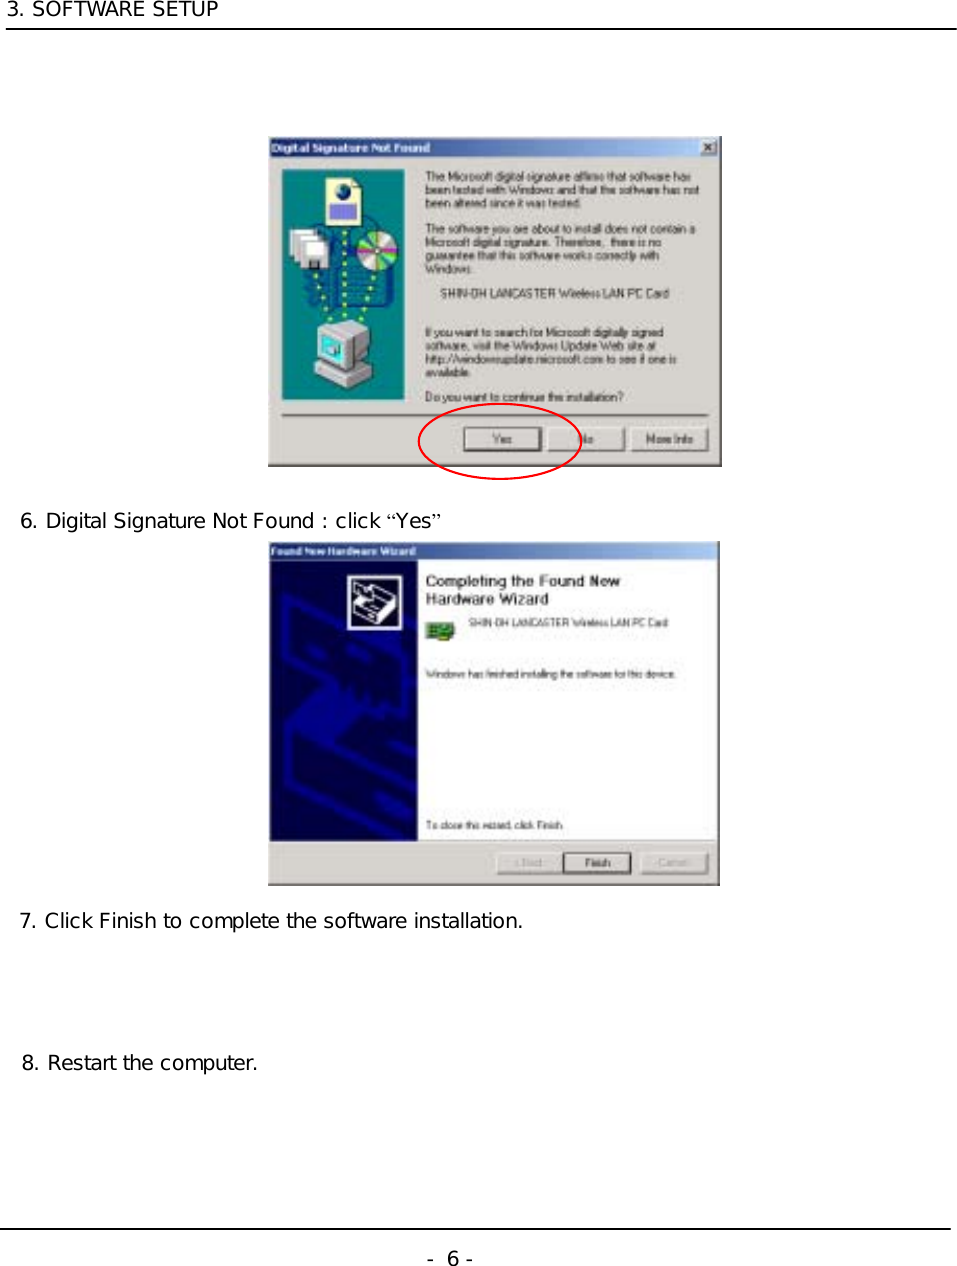 3. SOFTWARE SETUP6. Digital Signature Not Found : click “Yes”-6 -7. Click Finish to complete the software installation.8. Restart the computer.